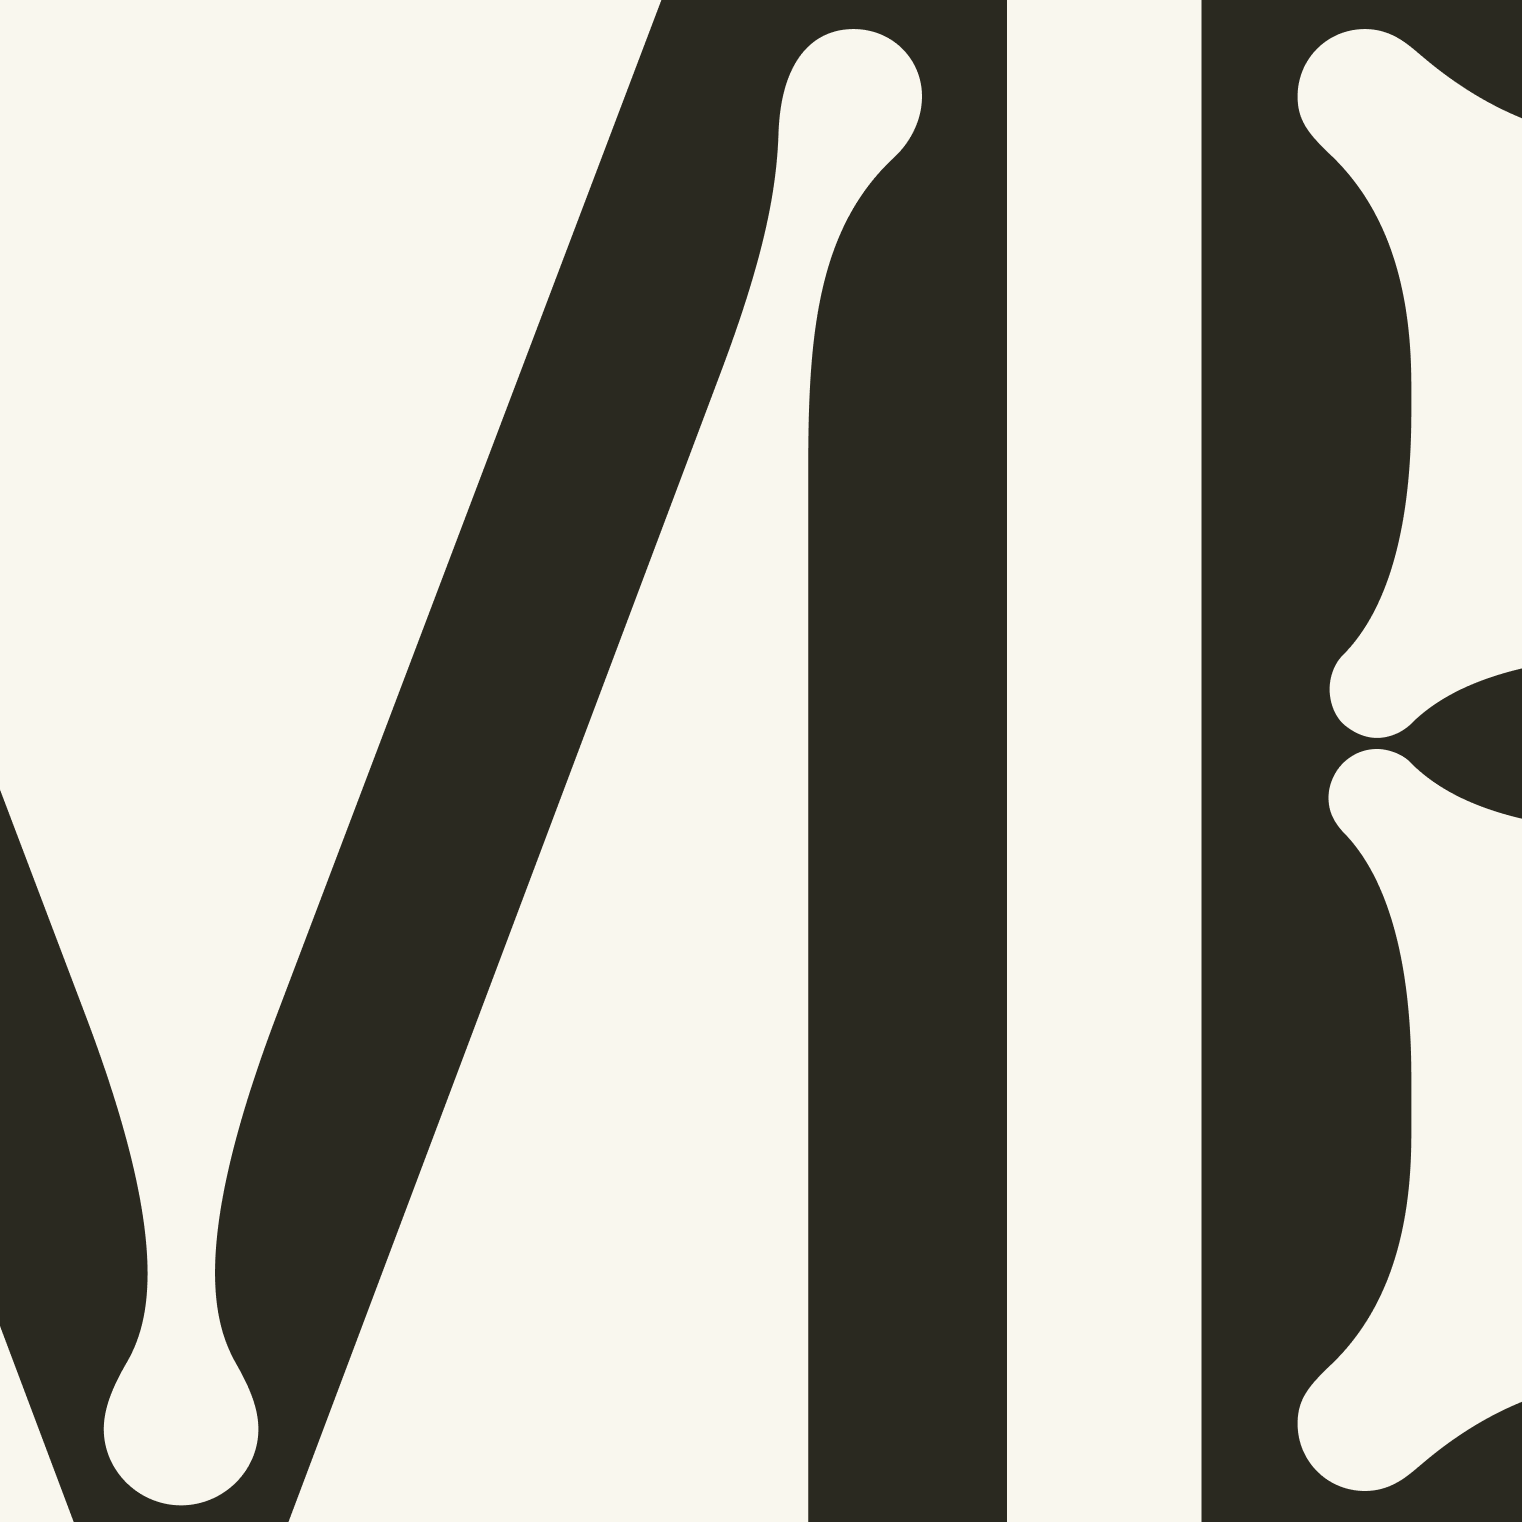 Close-up of typography details on the custom typeface designed for BeeHome